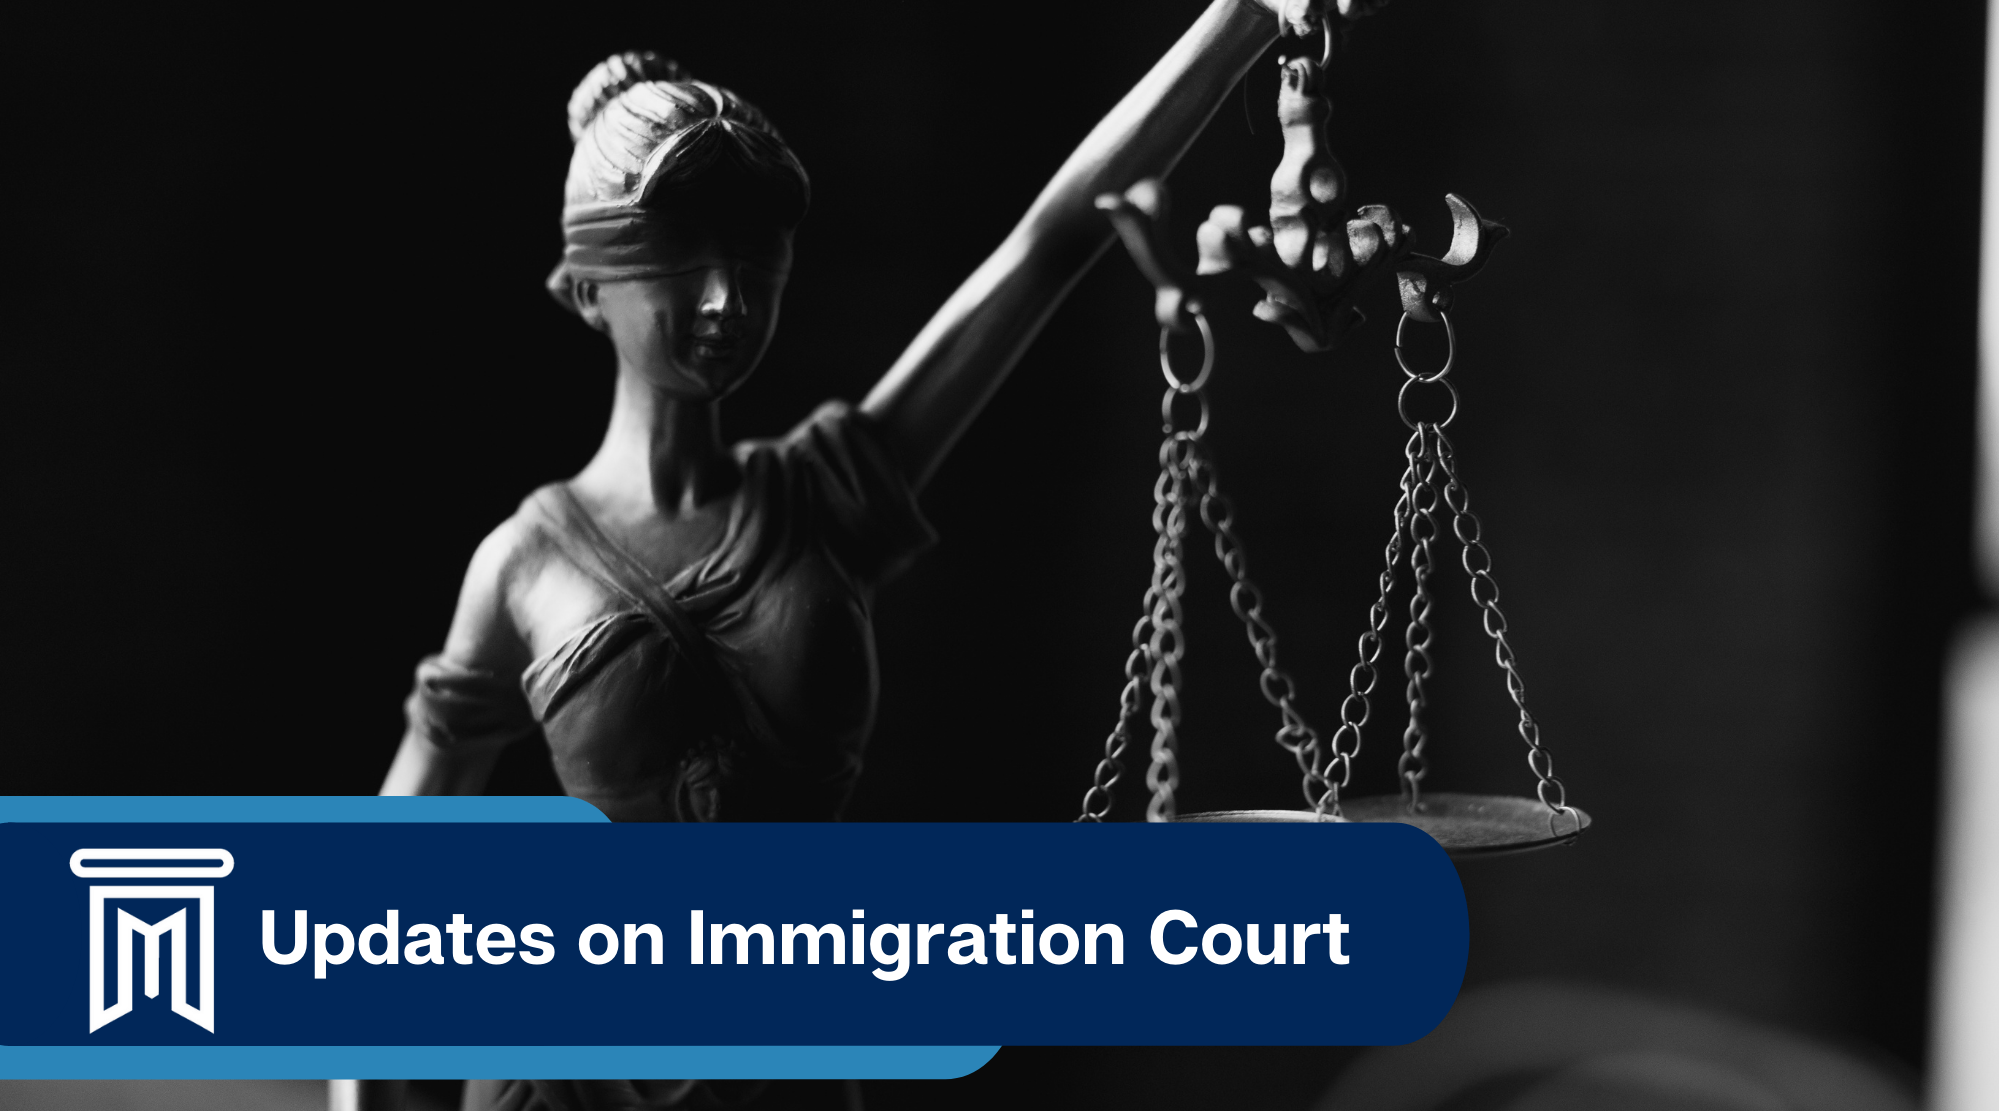 Updates on immigration court